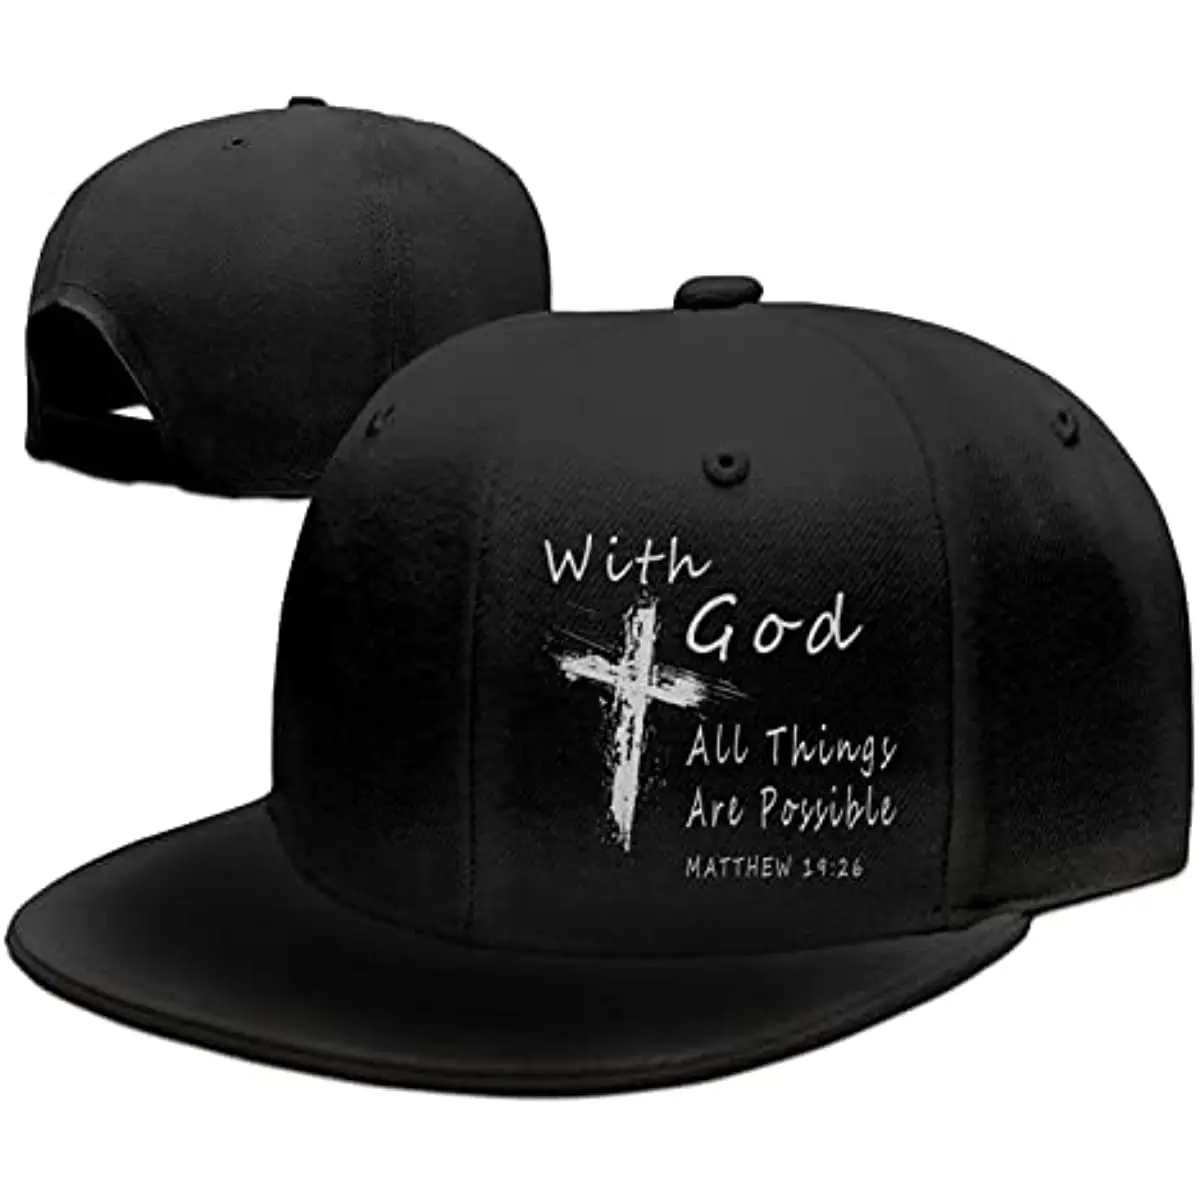 

With God All Things Are Possible Christian Faith Snapback Hats for Men Baseball Cap Adjustable Flat Bill Trucker Dad Gift